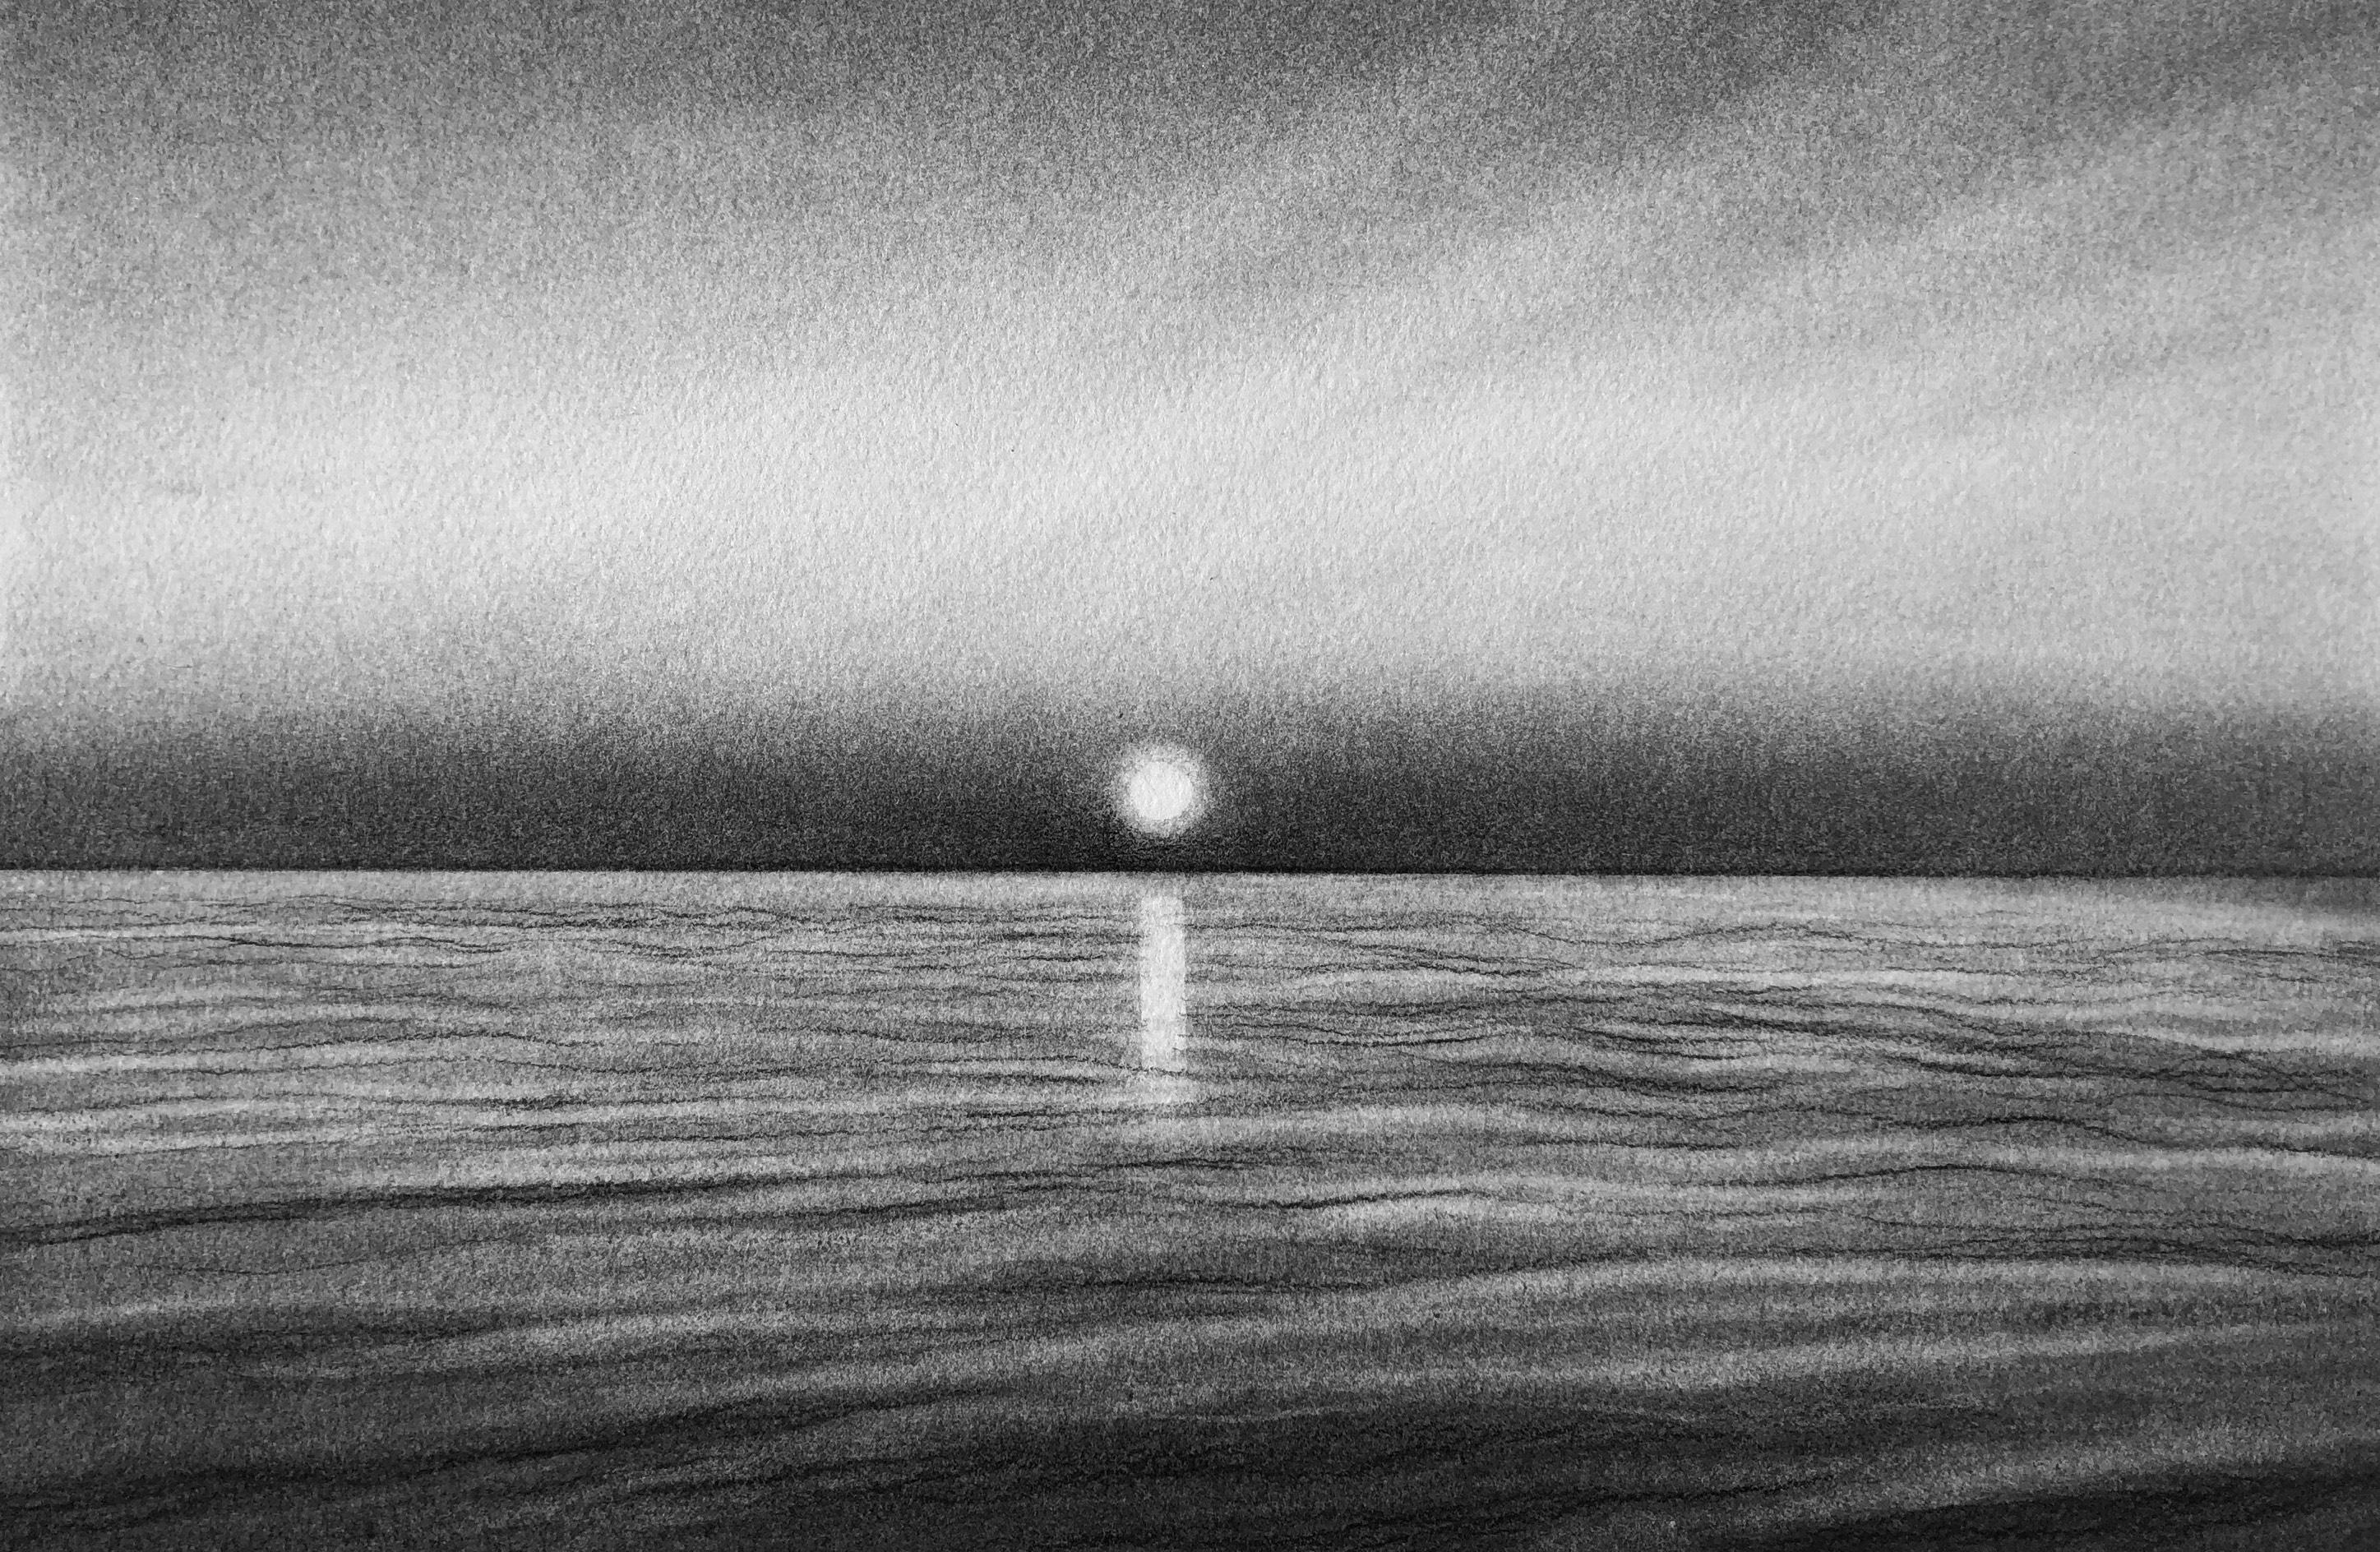 Strawberry Island Sunset, black and white charcoal drawing of the ocean